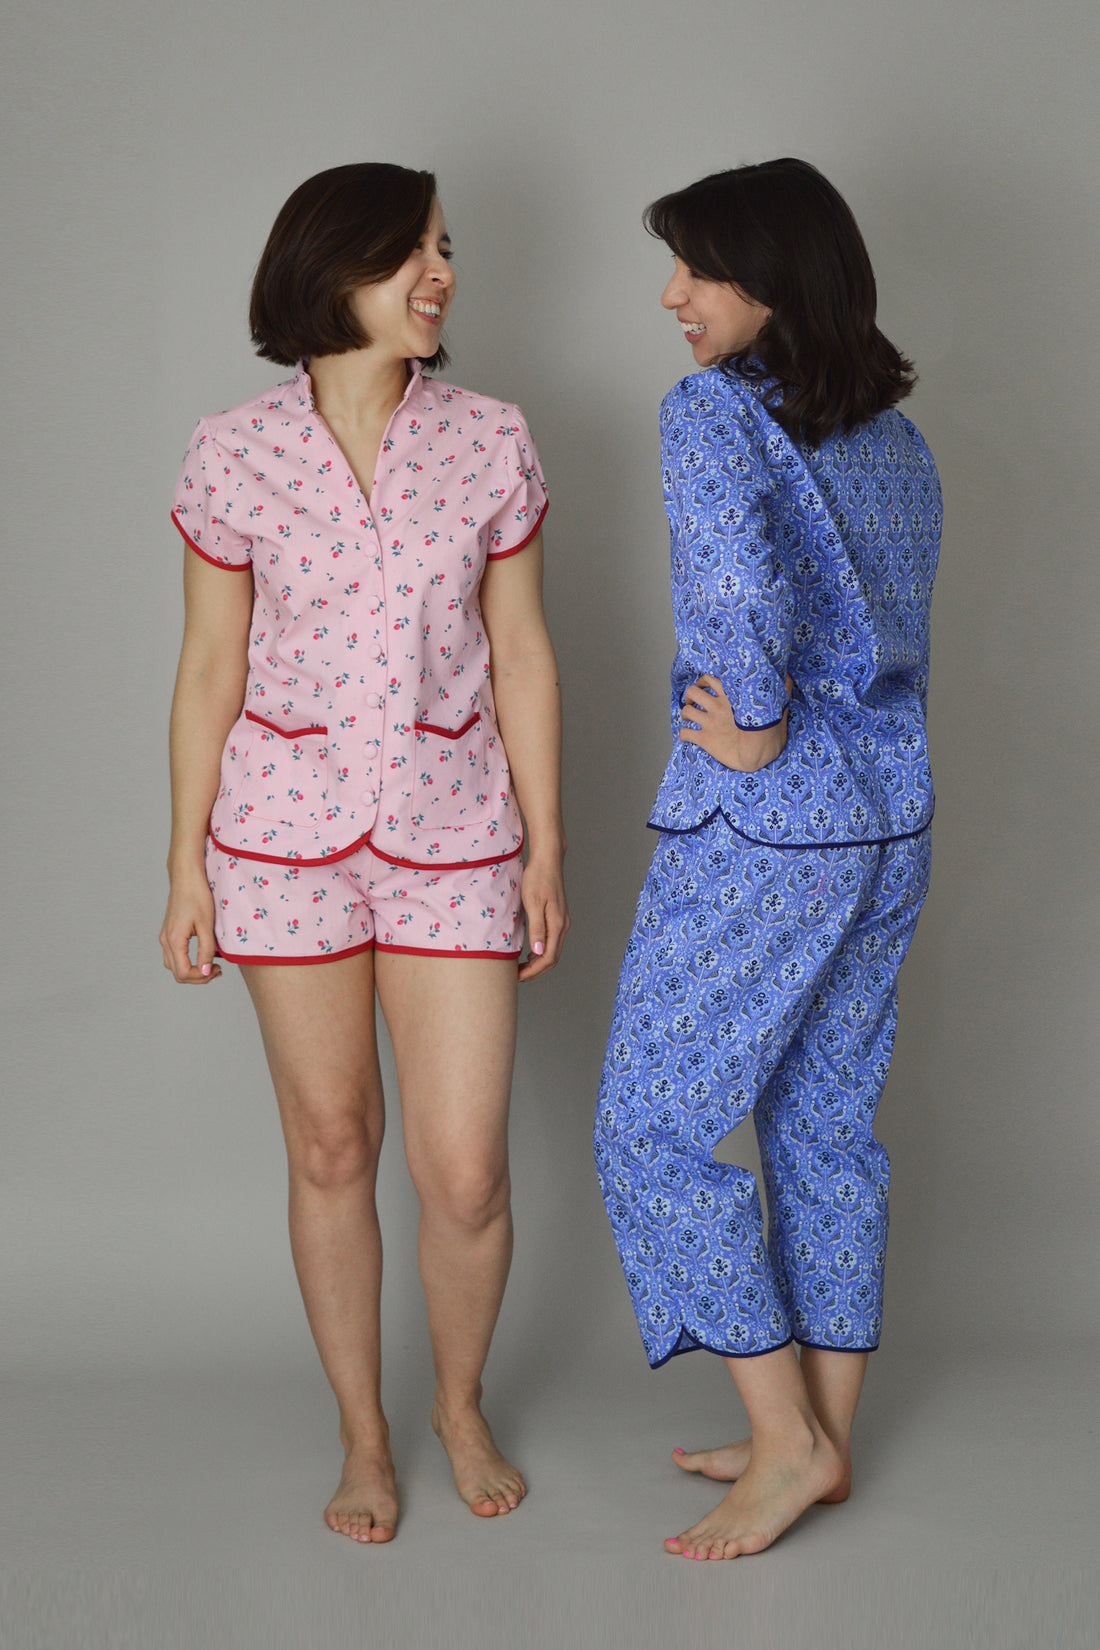 The Piccadilly Pyjamas - inspiration, testers' makes and fabric suggestions!